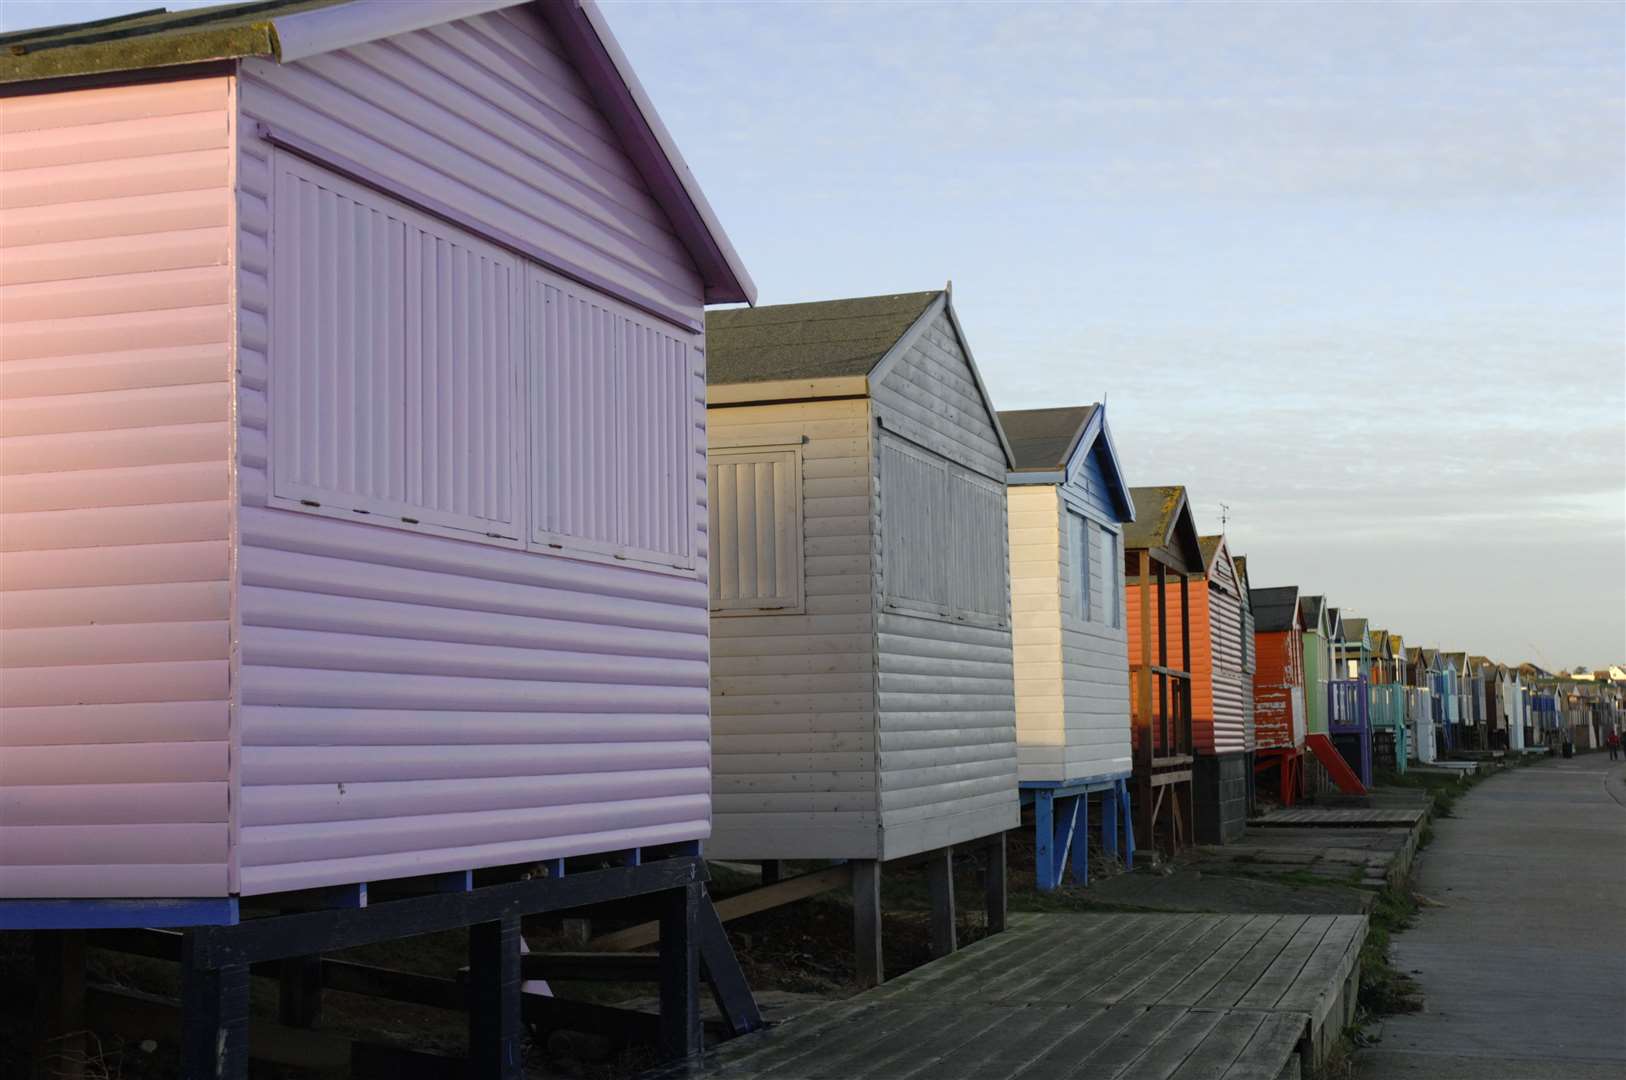 Beach huts in Whitstable are among those most photographed in the UK